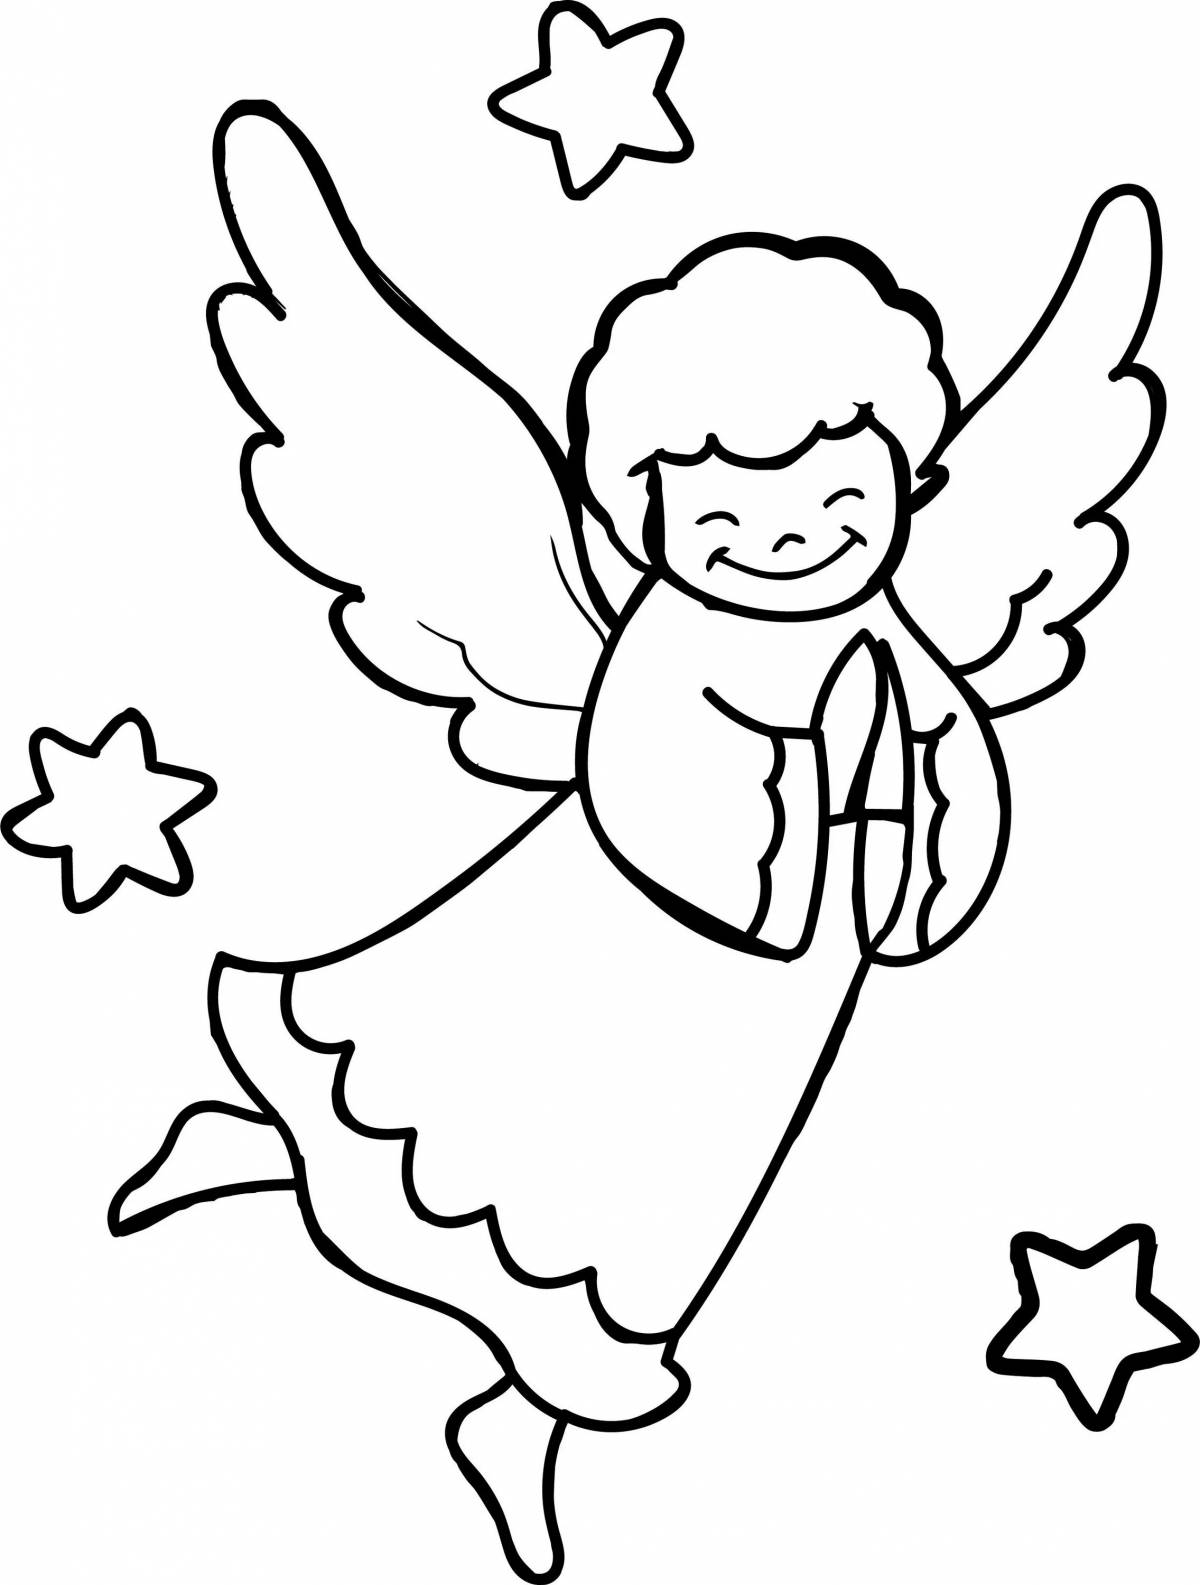 Exalted New Year's Angel coloring page